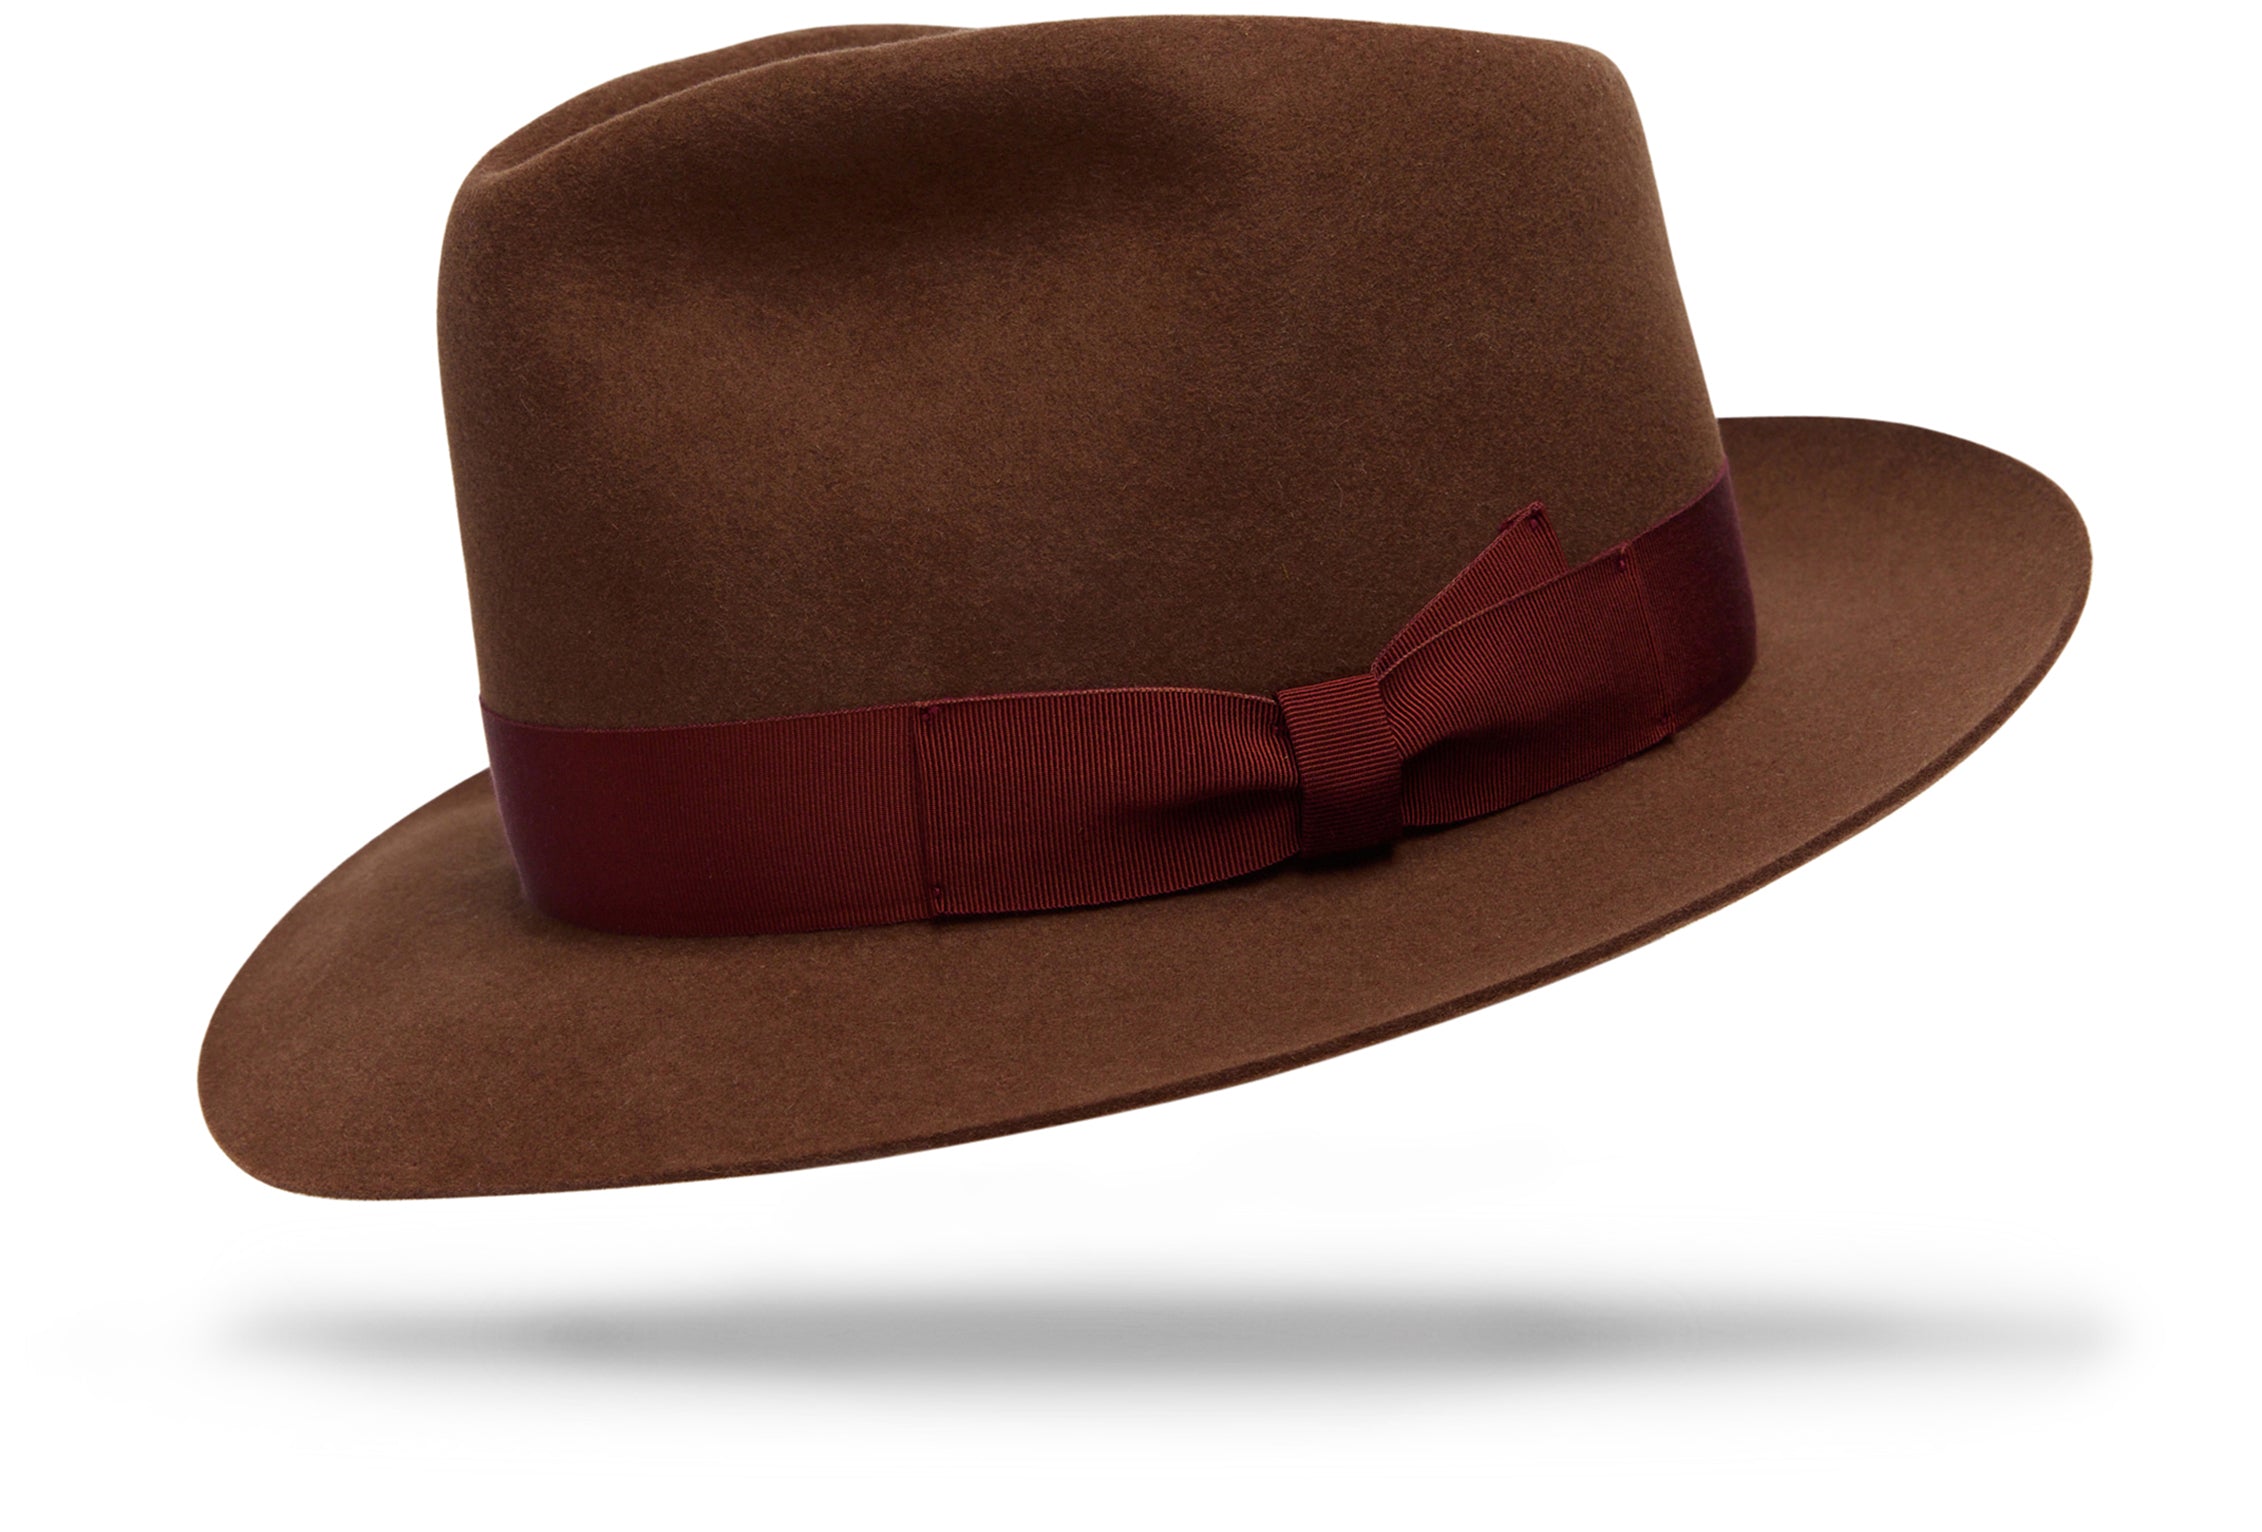 Design
The Roma Cacao is a distinctive classic. Made out of 100% hare fur felt, It boasts a 2 ½” brim and a 4 crown and a 1 ¼” tone-on-tone hatband. A timeless design refined with style.
Material
100% hare fur felt, sustainably acquired
Specifications
- 100% hare fur felt.- 4” crown and a 2 ½” brim complete with a- 1 ¼” hatband. - Handcrafted in our NYC atelier with love.